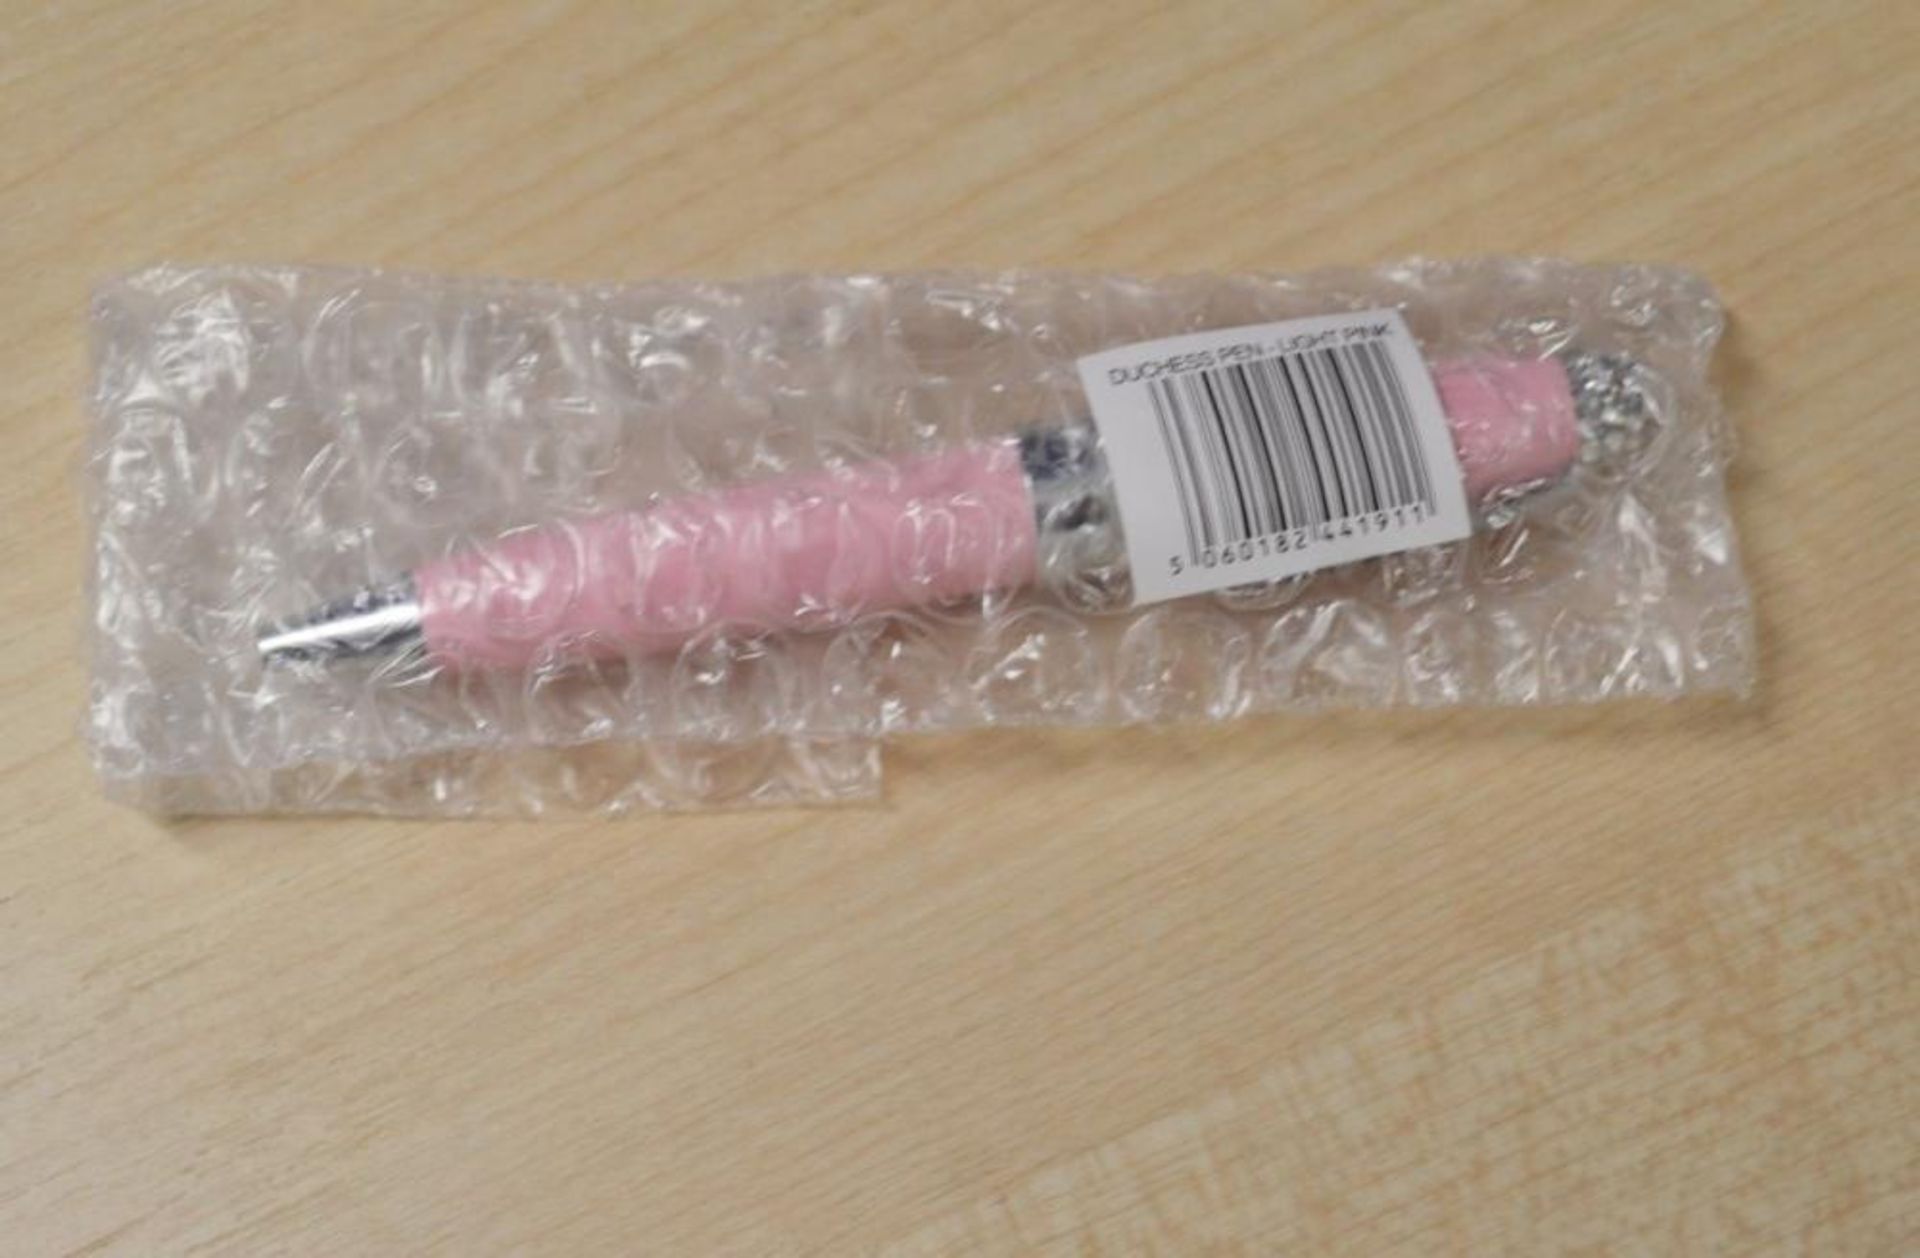 10 x ICE LONDON "Duchess" Ladies Pens - All Embellished With SWAROVSKI Crystals - Colour: Light Pink - Image 2 of 3